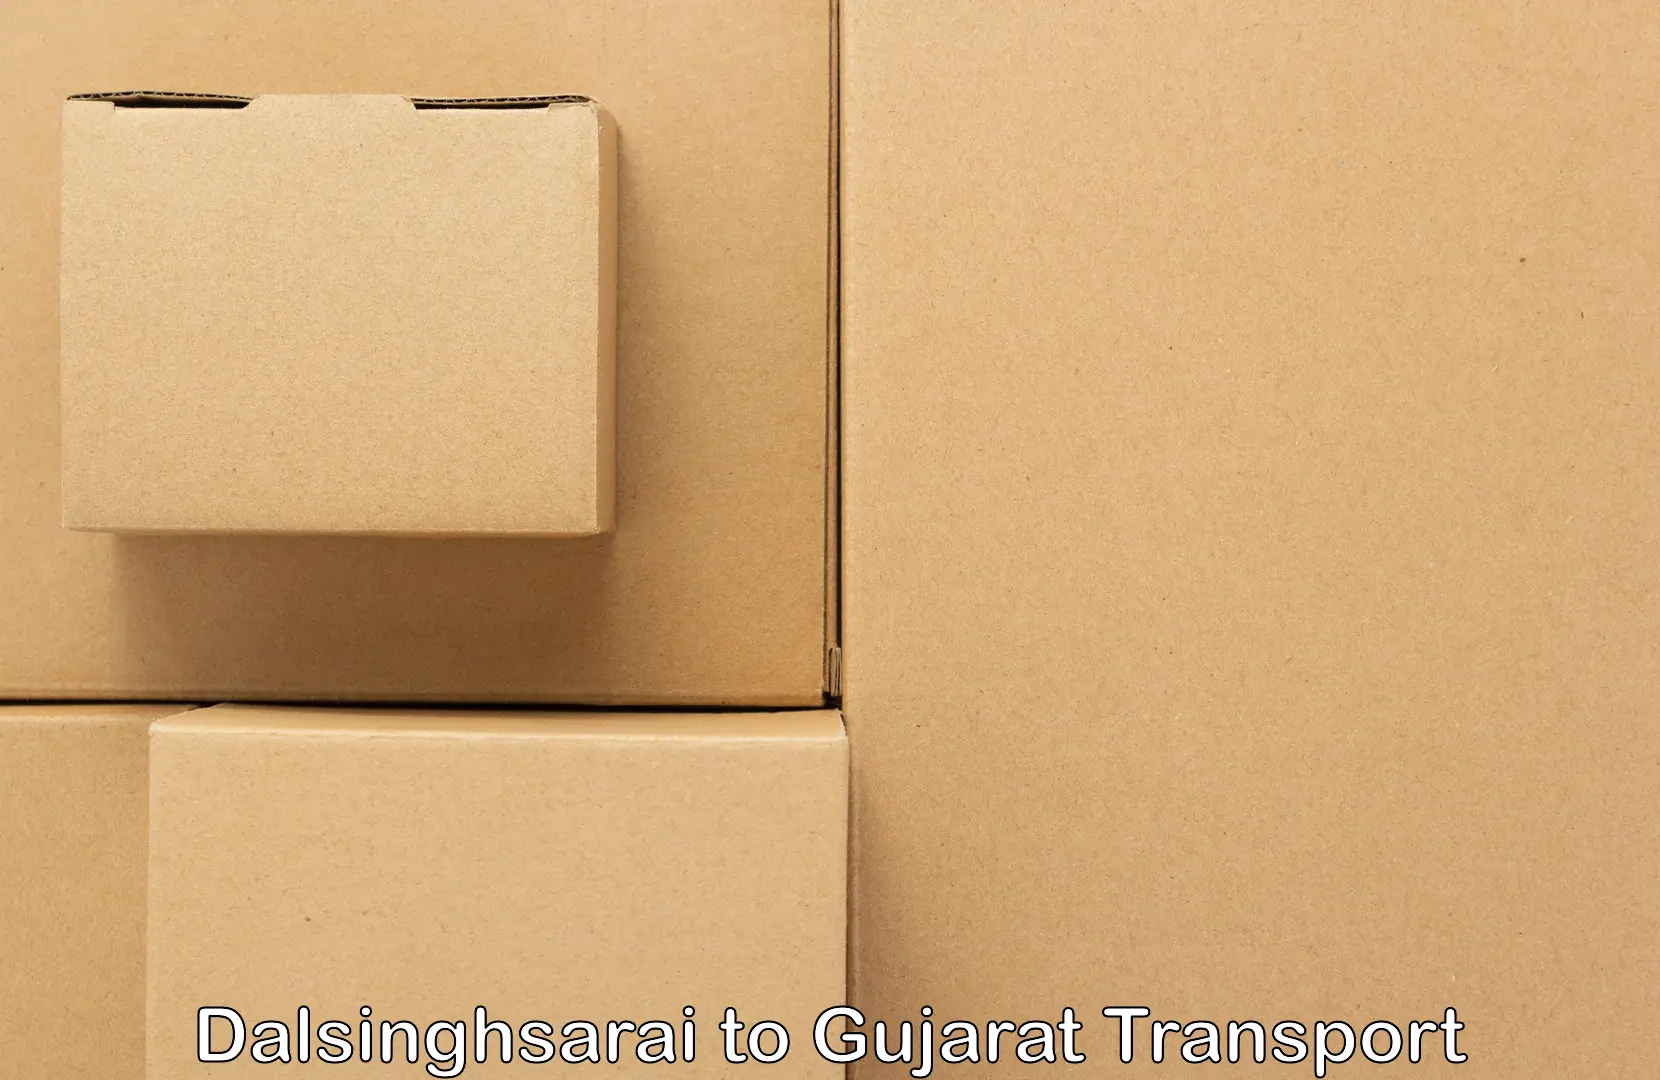 Commercial transport service Dalsinghsarai to Matar